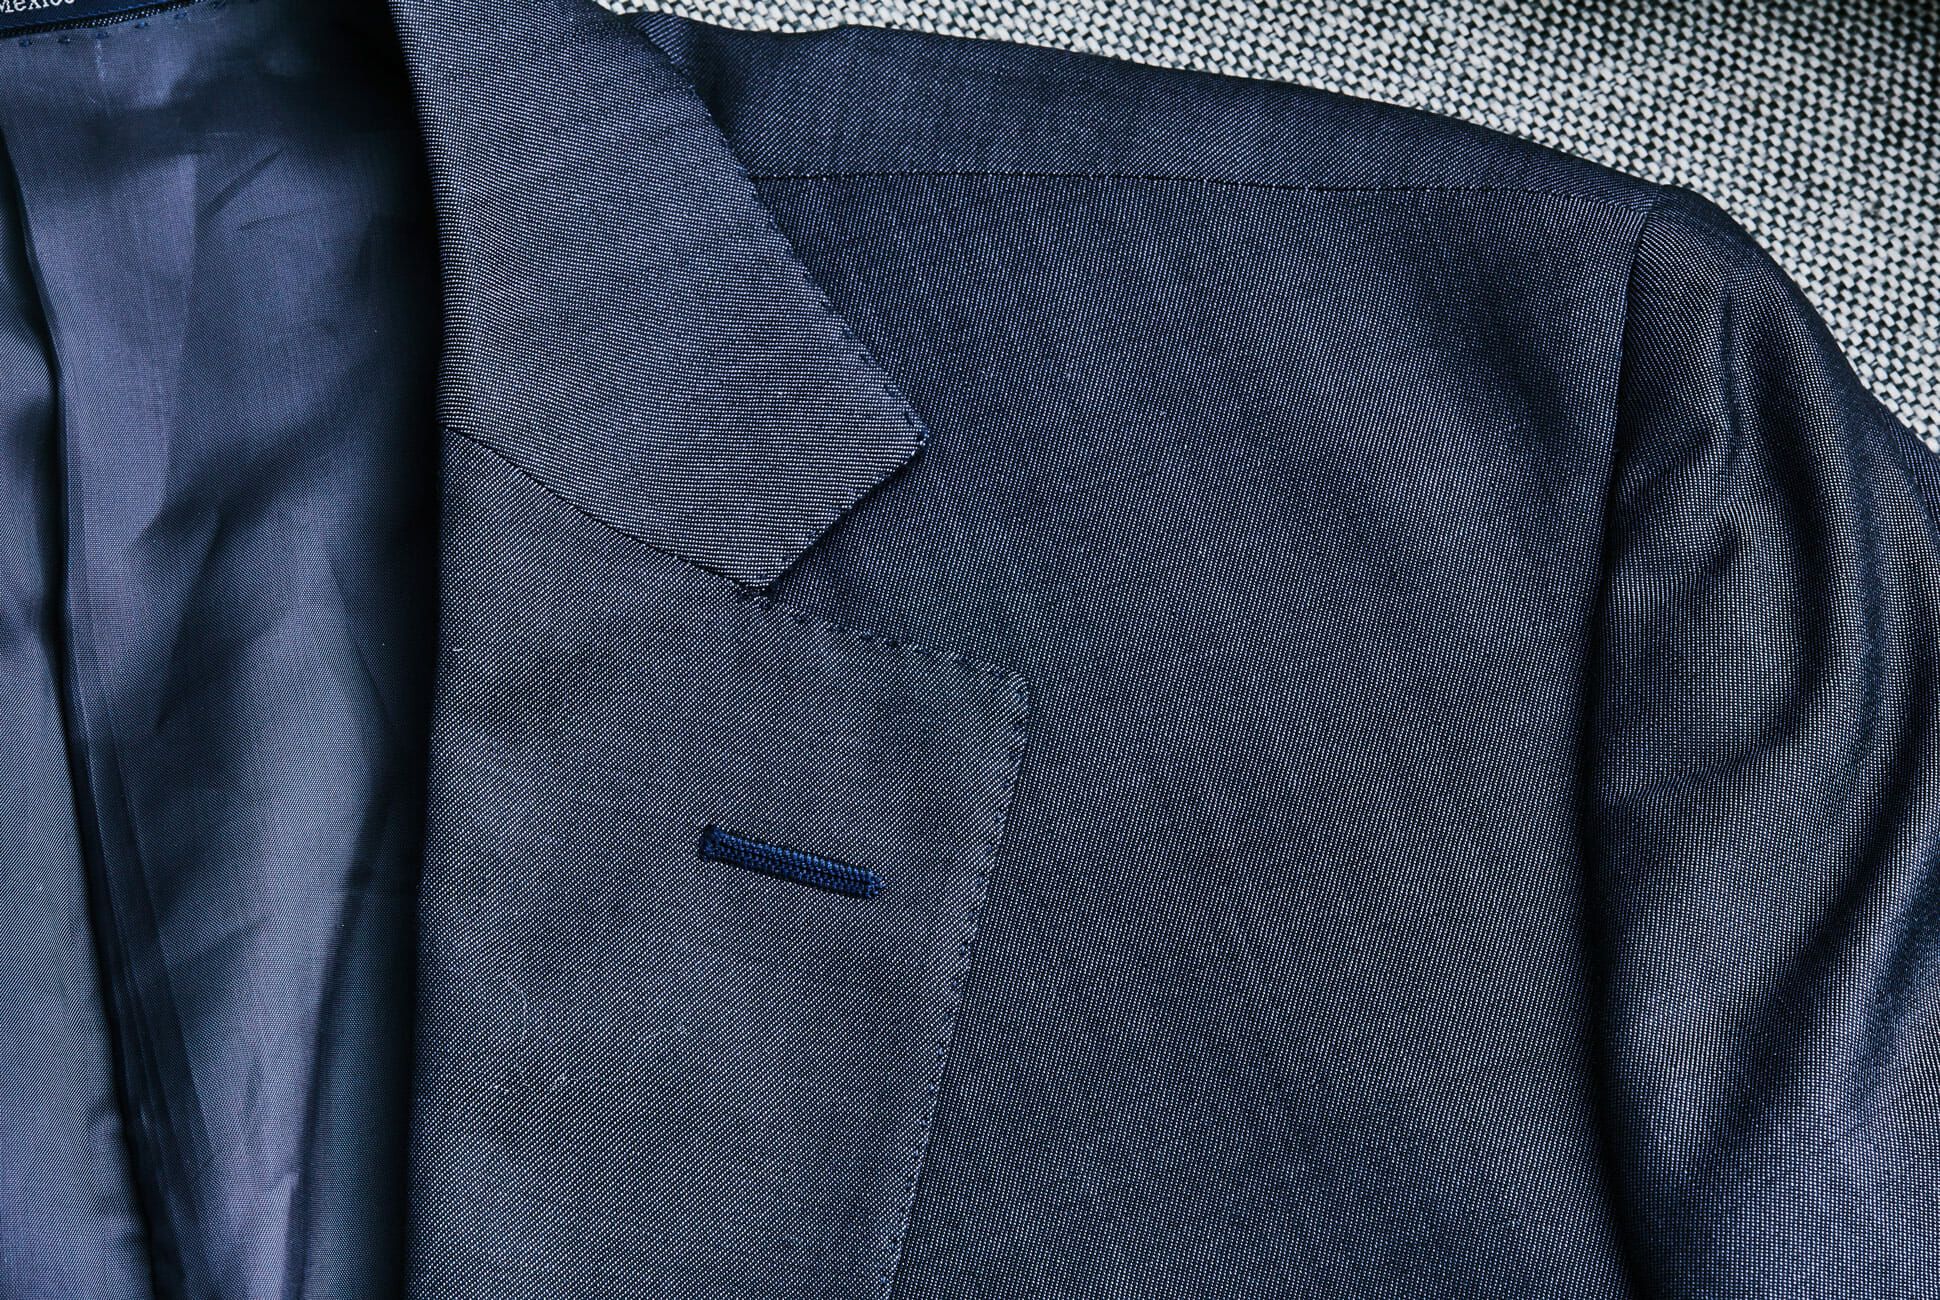 Why Do Suits Have a Random Buttonhole on the Lapel? We Found Out